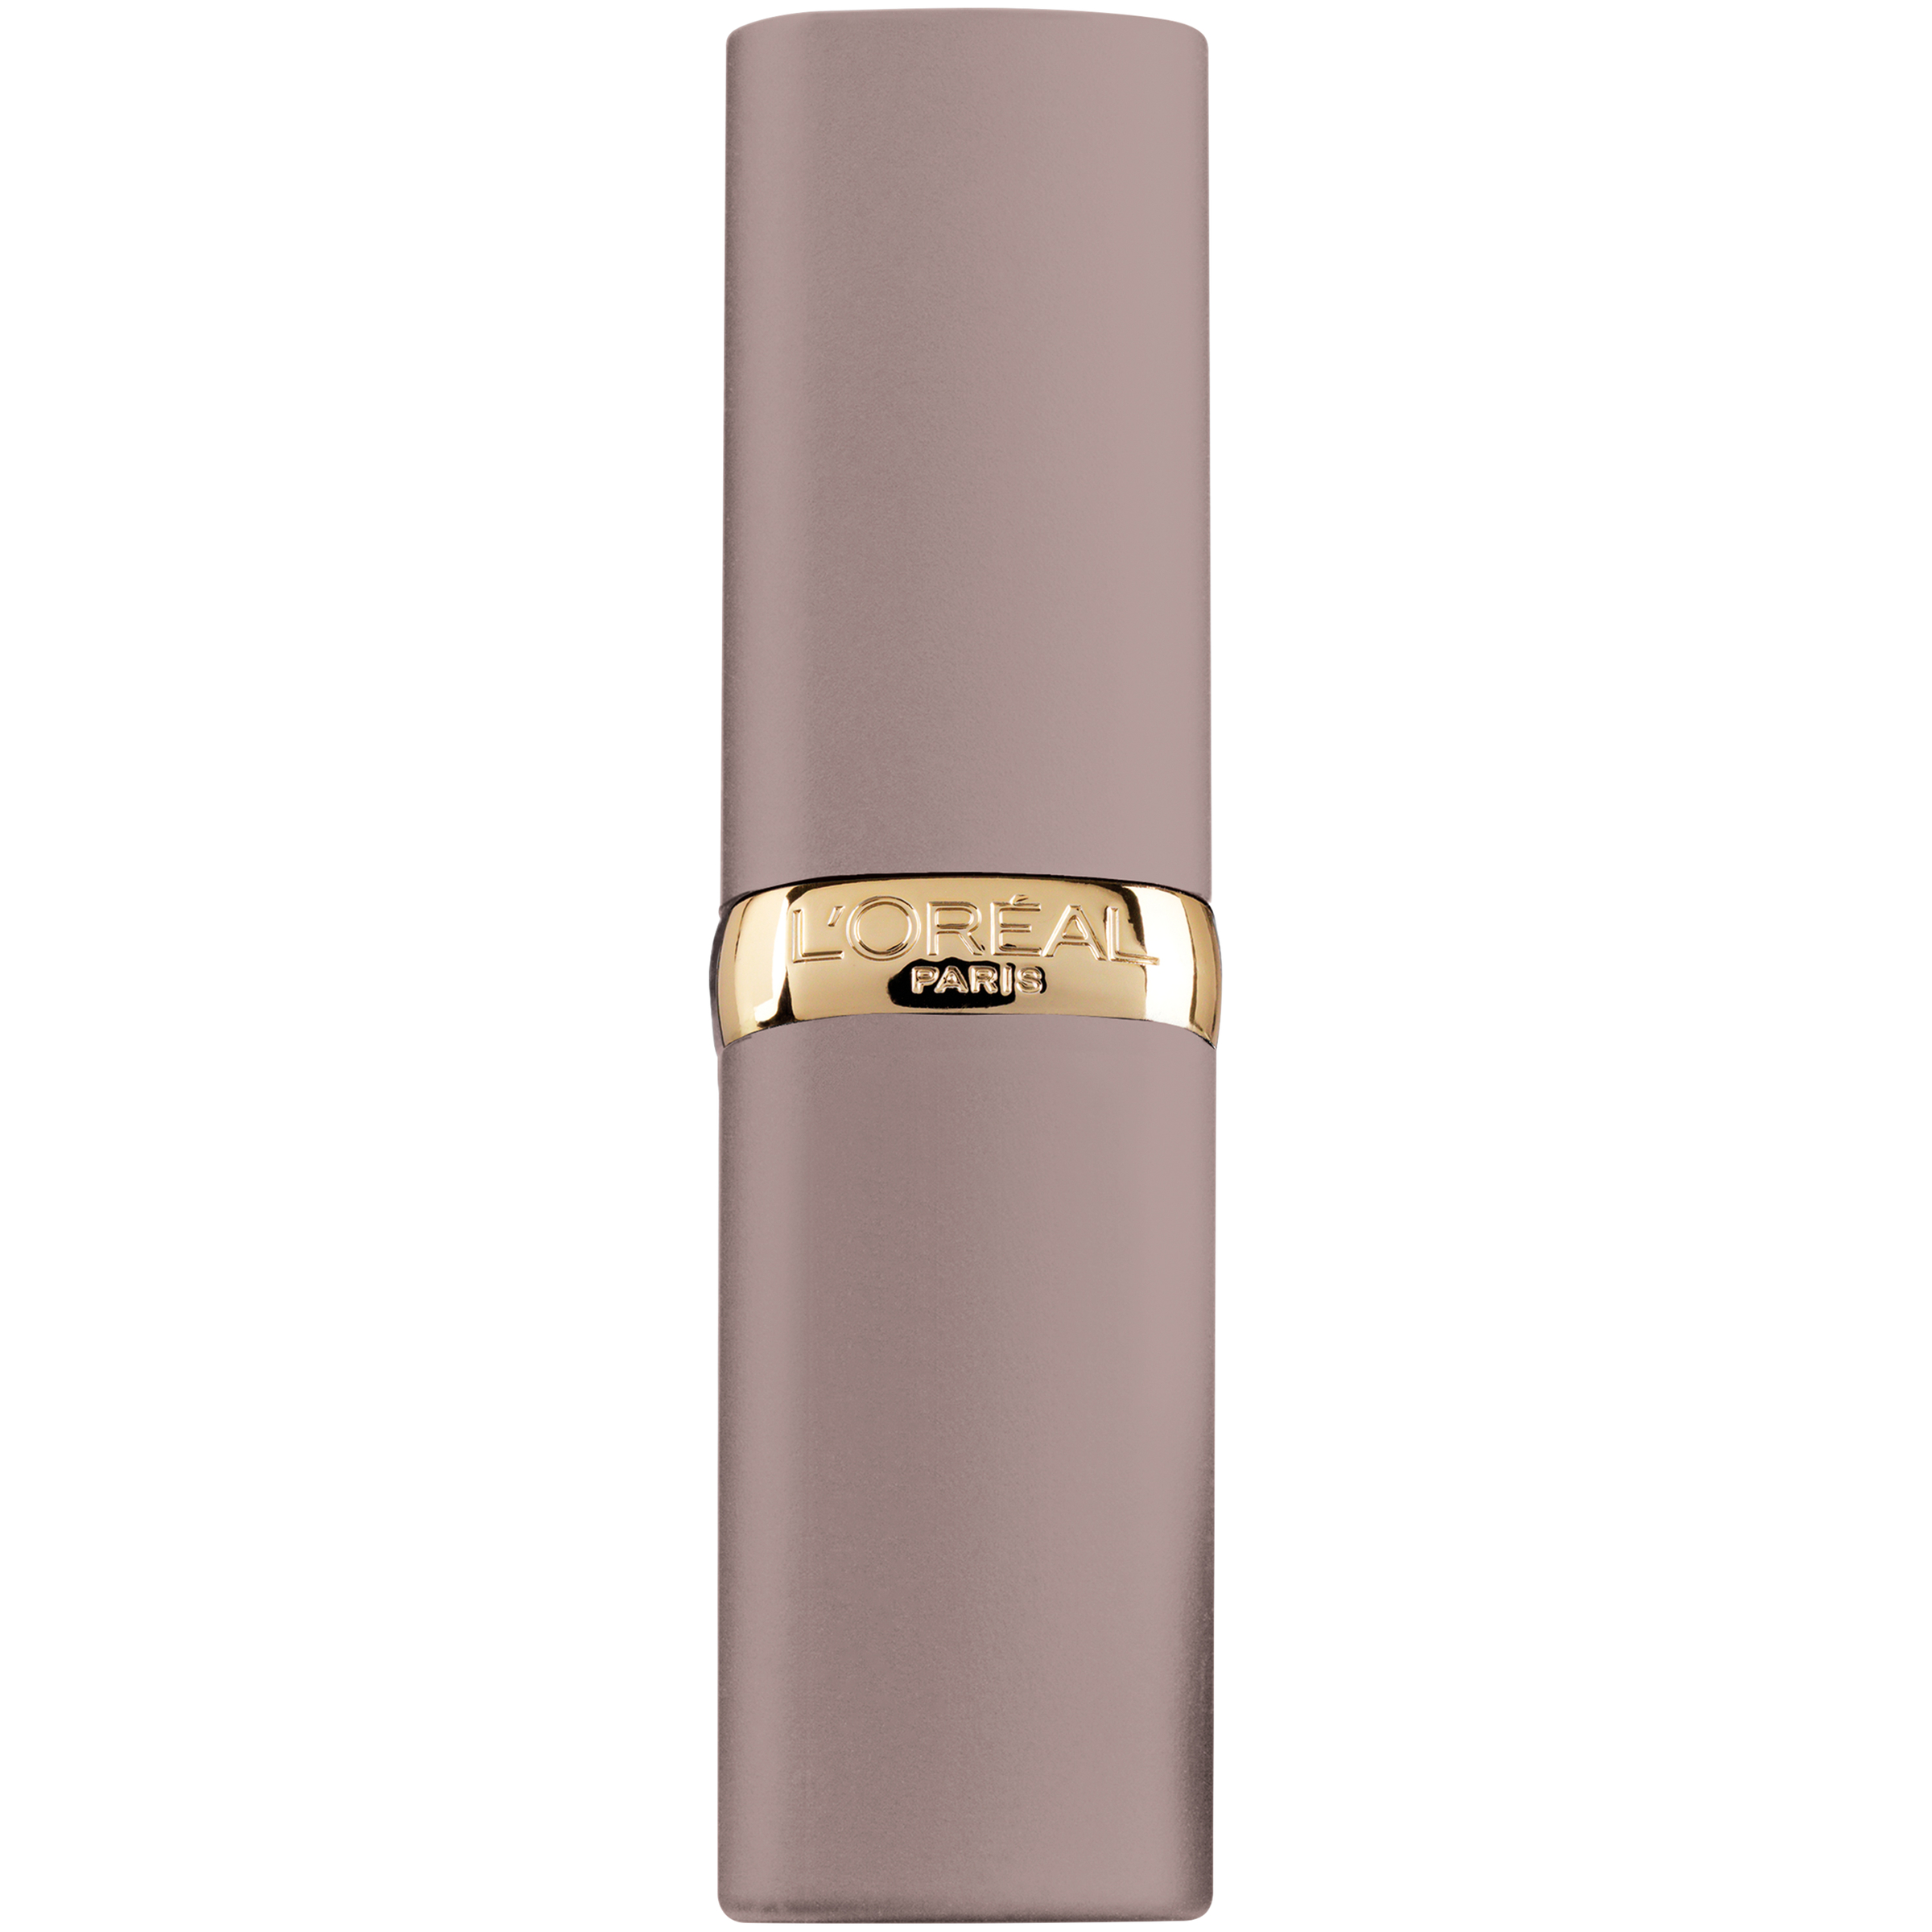 L'Oreal Paris Colour Riche Ultra Matte Highly Pigmented Nude Lipstick, Risque Roses, 0.13 oz. - image 5 of 5